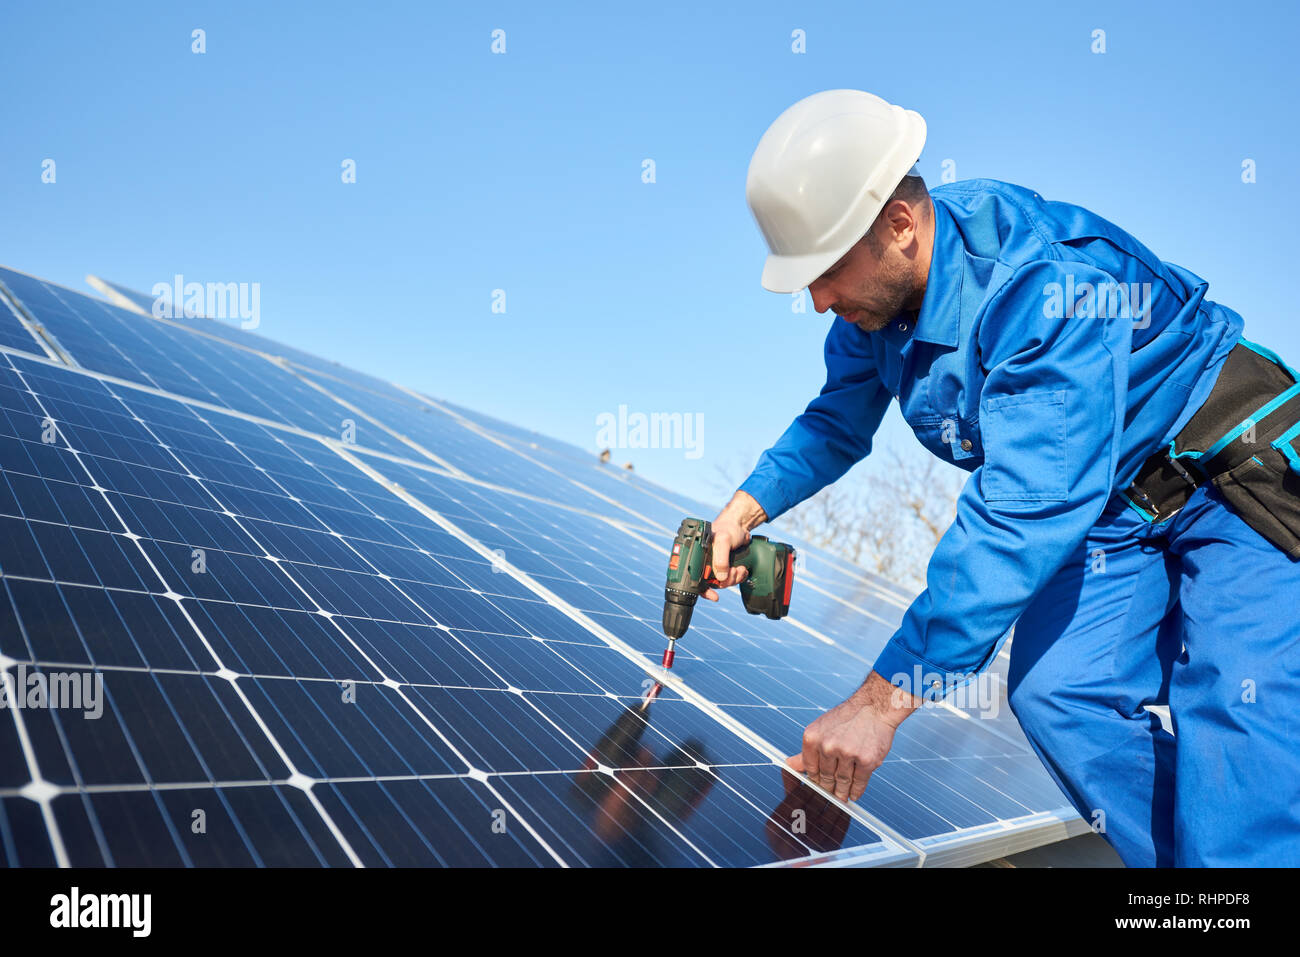 Man worker in blue suit and protective helmet installing solar photovoltaic panel system using screwdriver. Professional electrician mounting blue solar module. Alternative energy ecological concept. Stock Photo